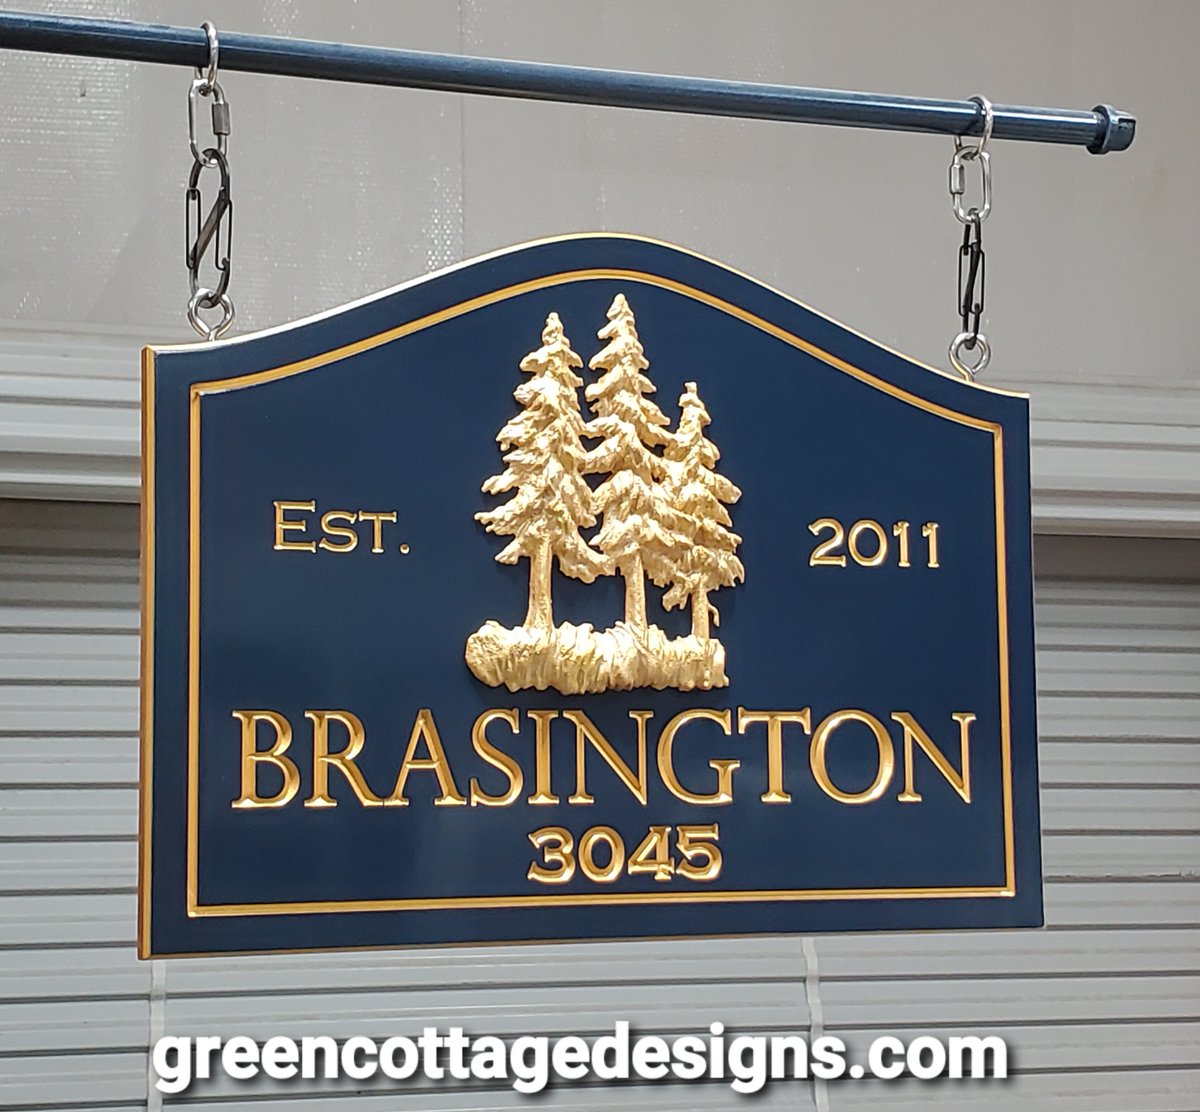 Custom Hanging Signs
All Weather Estate Name Address Sign
https://t.co/mxWEx03oVb Renderings Provided #Minnesota #Wisconsin #Colorado #customsign #Boise https://t.co/KDD4YM8B4F